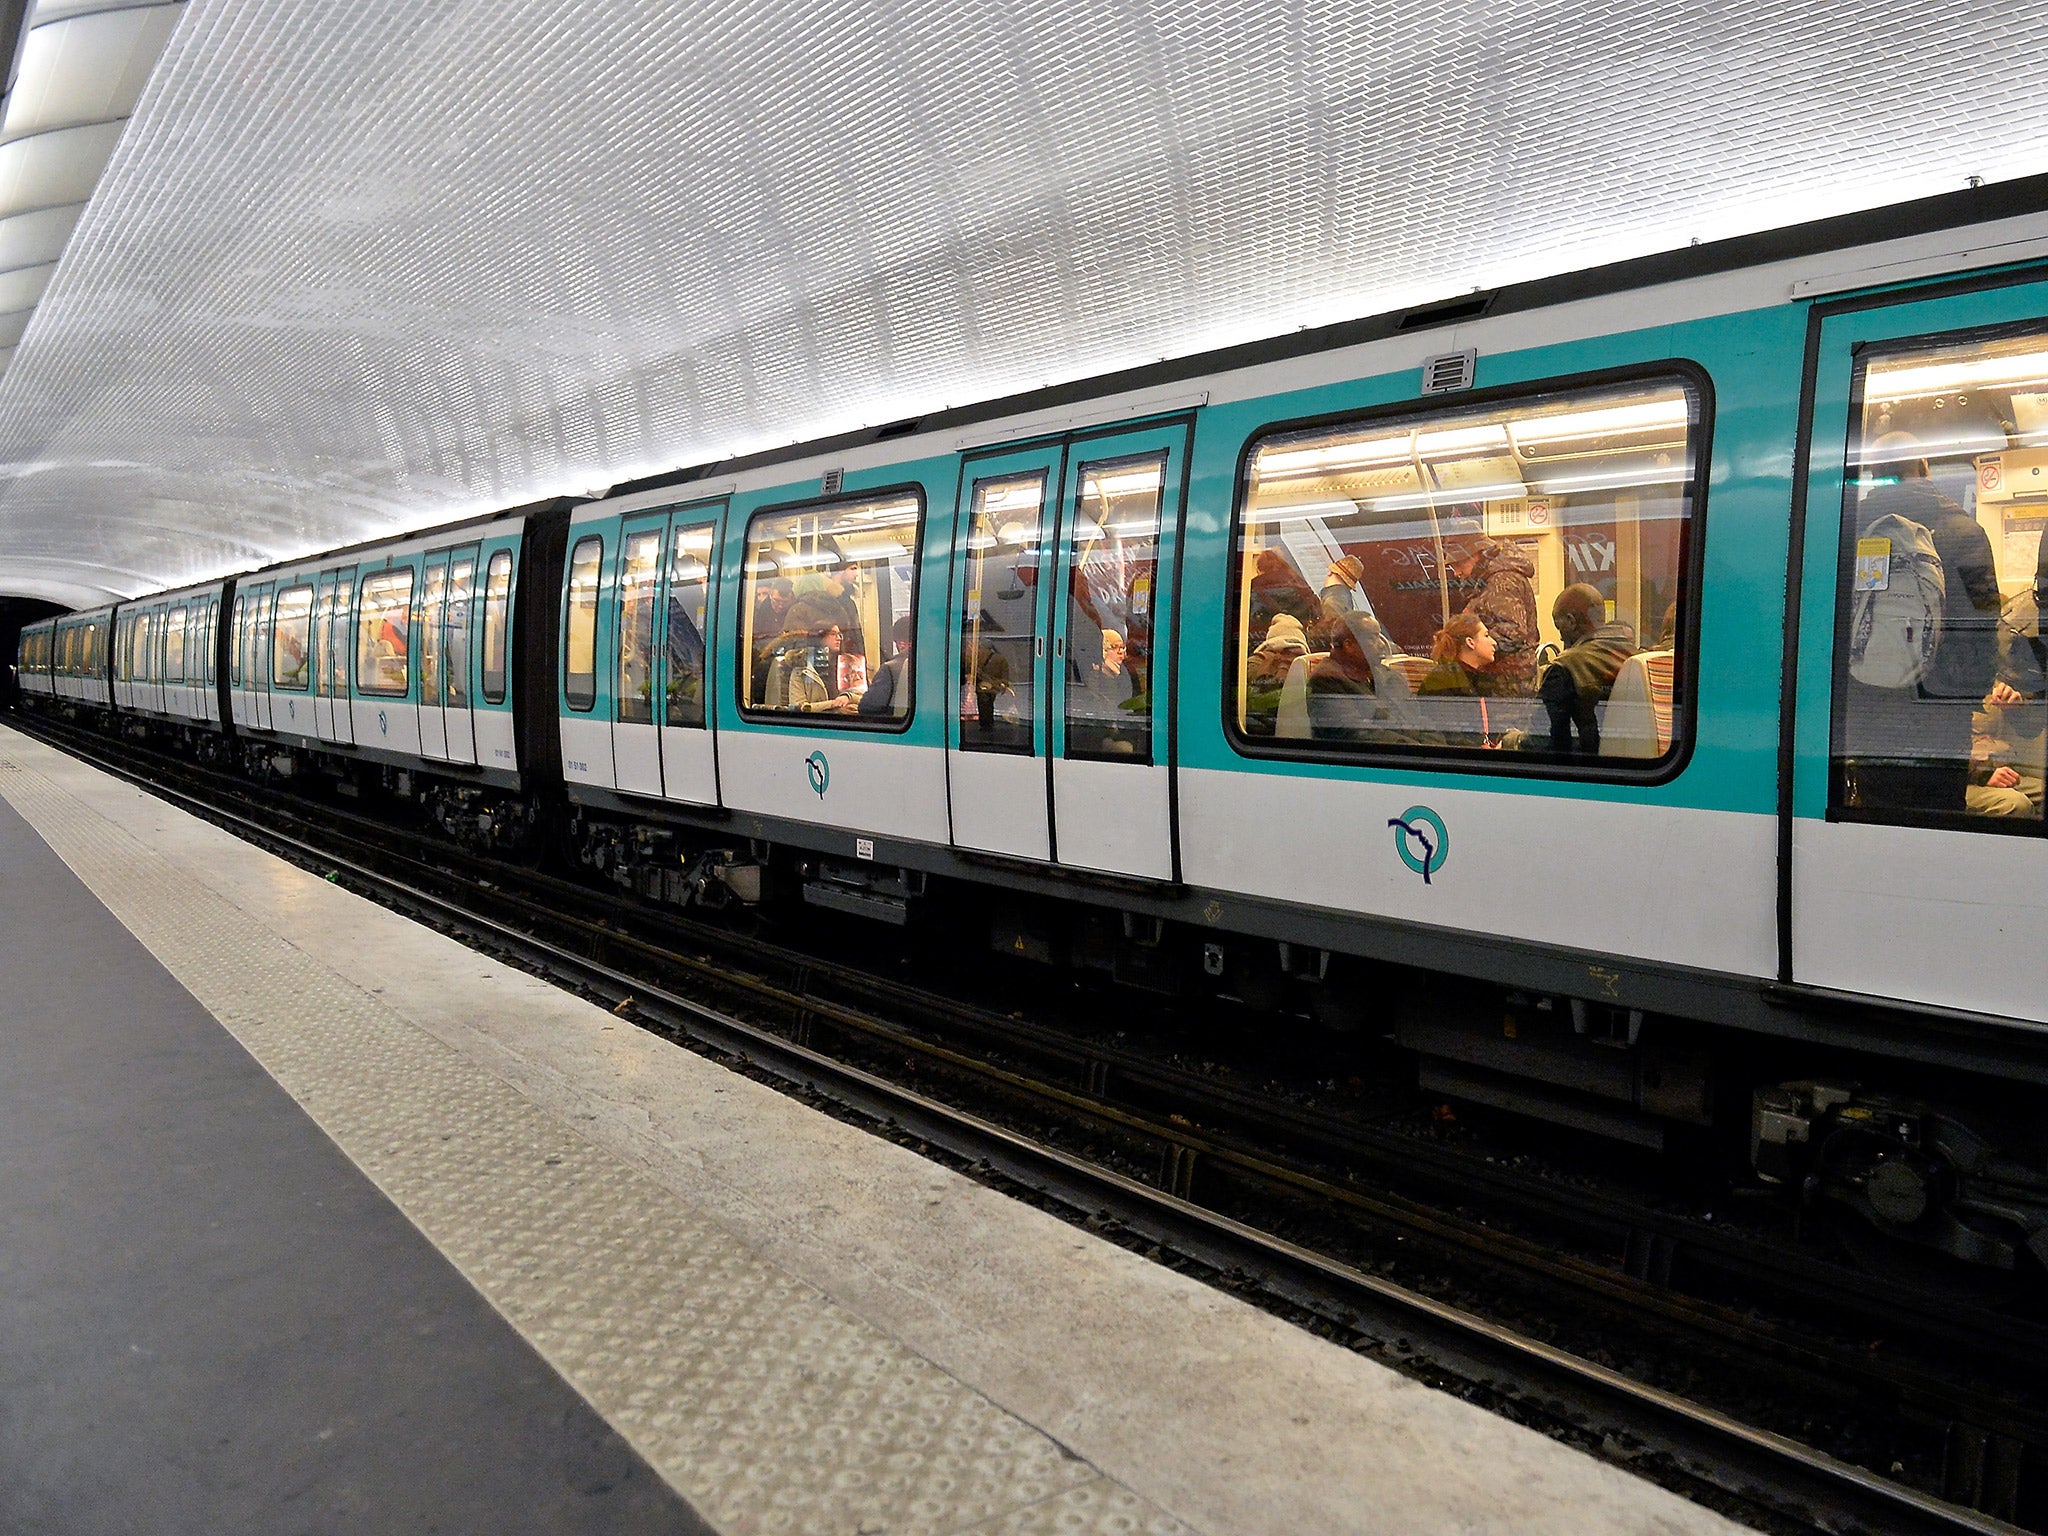 All women polled said they experienced unwanted sexual attention on transport in Paris